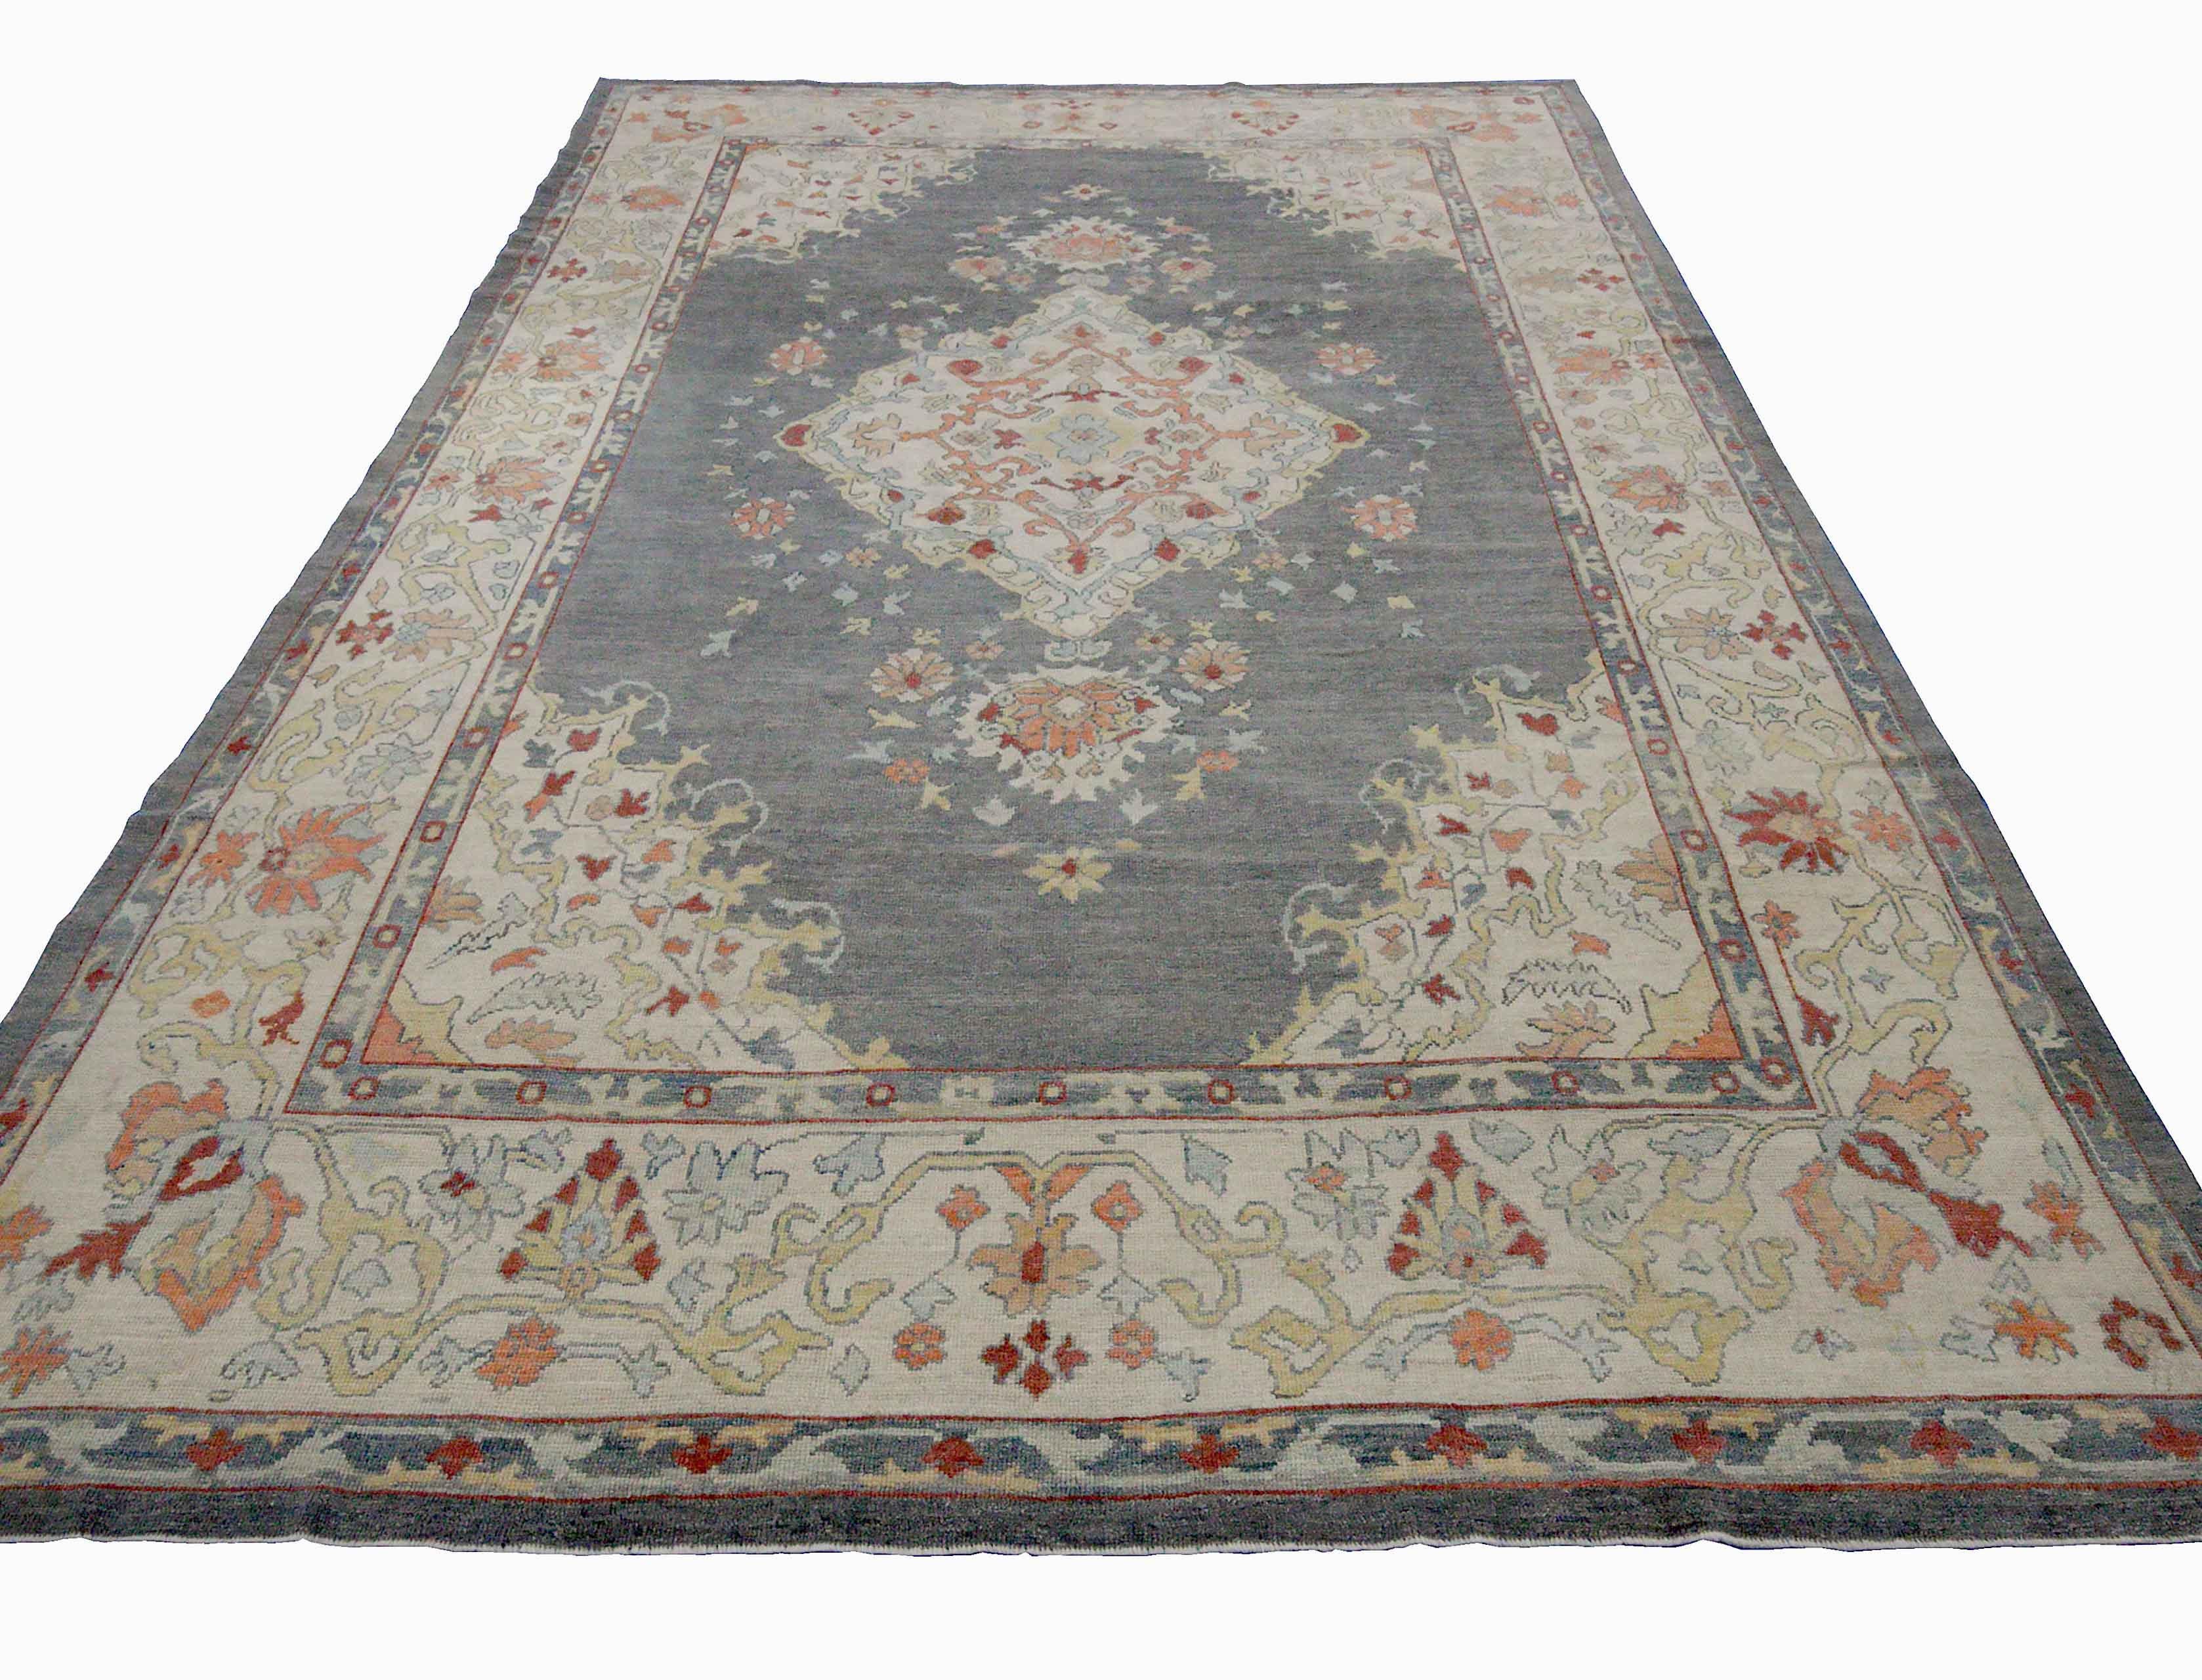 New Turkish runner rug made of handwoven sheep’s wool of the finest quality. It’s colored with organic vegetable dyes that are certified safe for humans and pets alike. It features floral details in pink and blue over a regal gray field. Flower